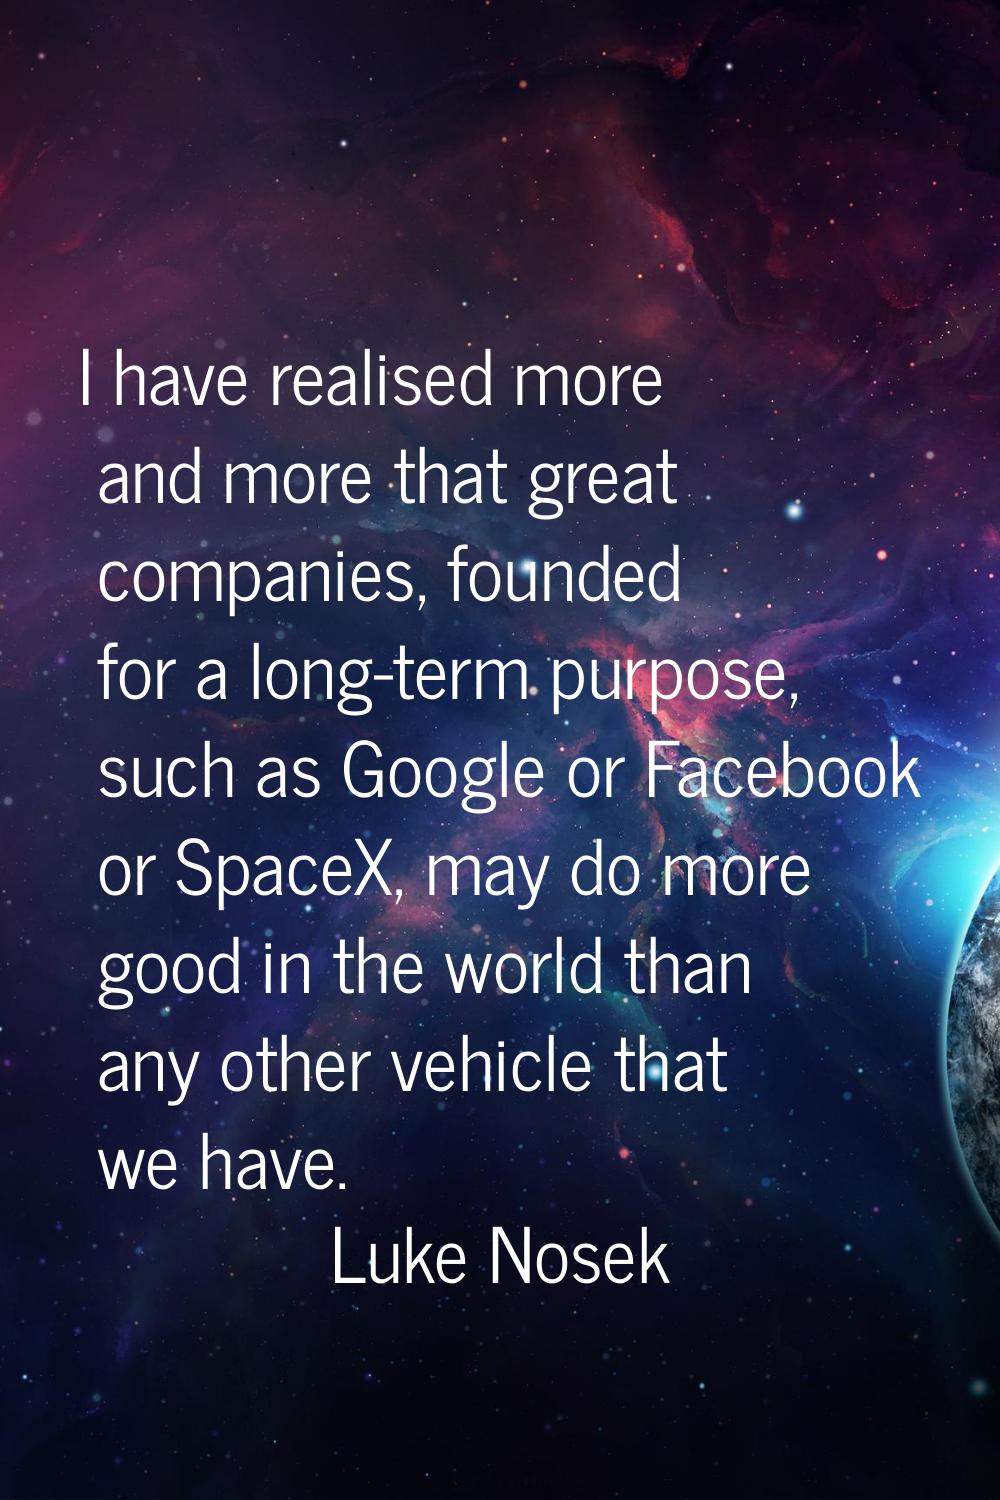 I have realised more and more that great companies, founded for a long-term purpose, such as Google